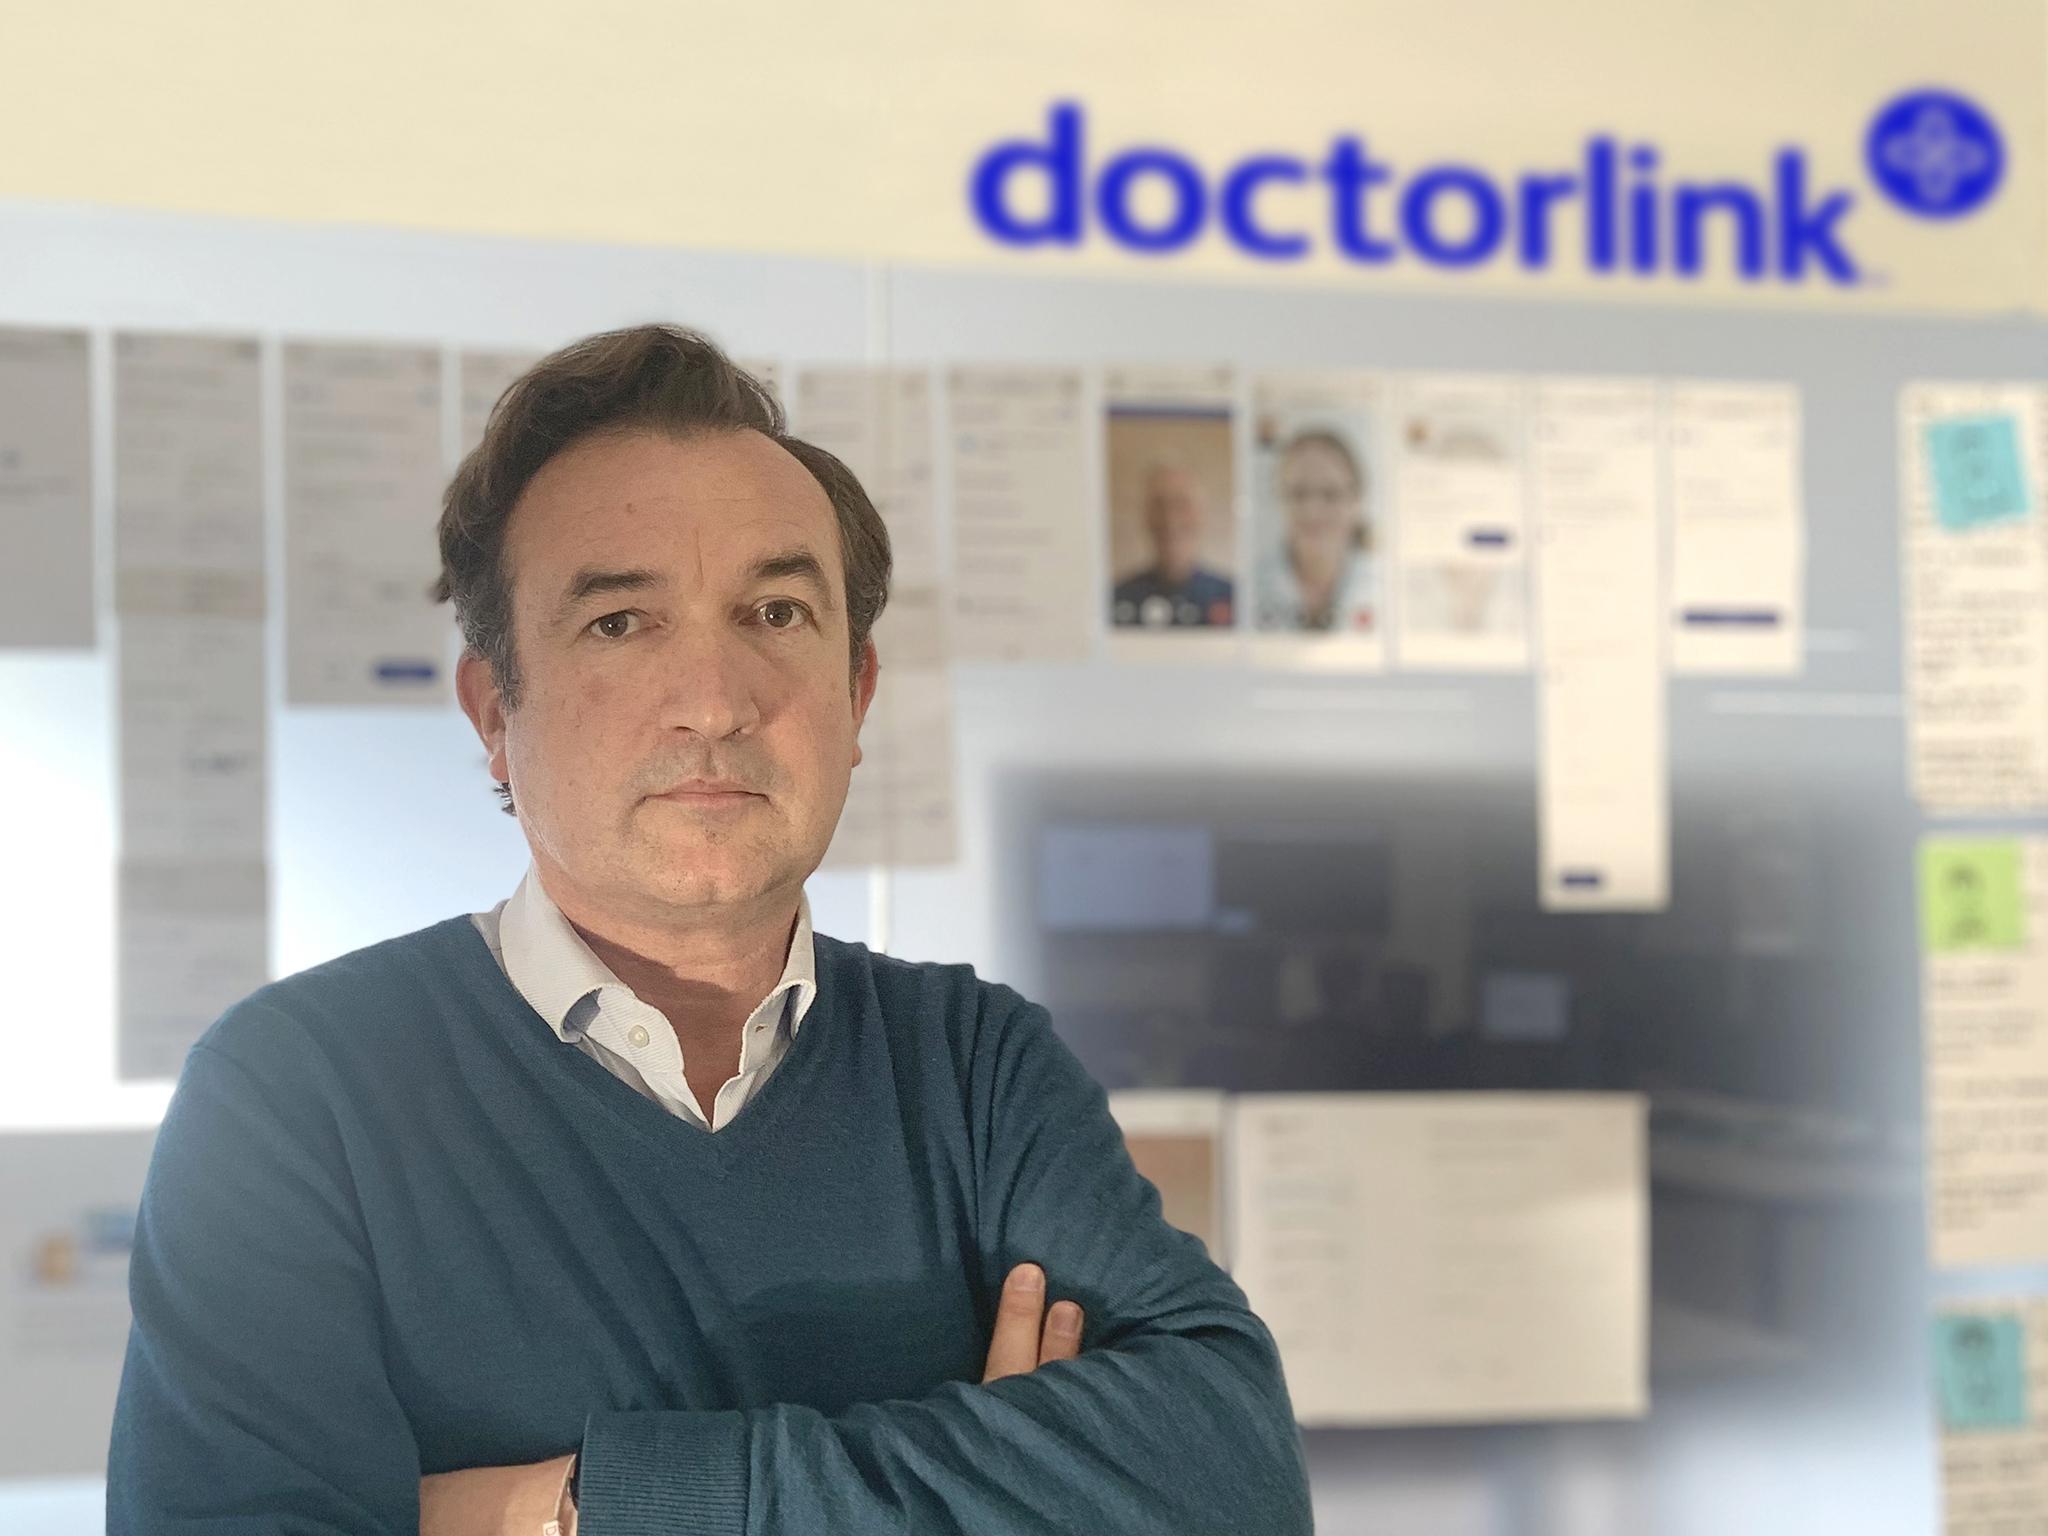 Rupert Spiegekberg and DoctorLink aim to triage patients before they arrive at A&E, lifting the load on doctors and the NHS system